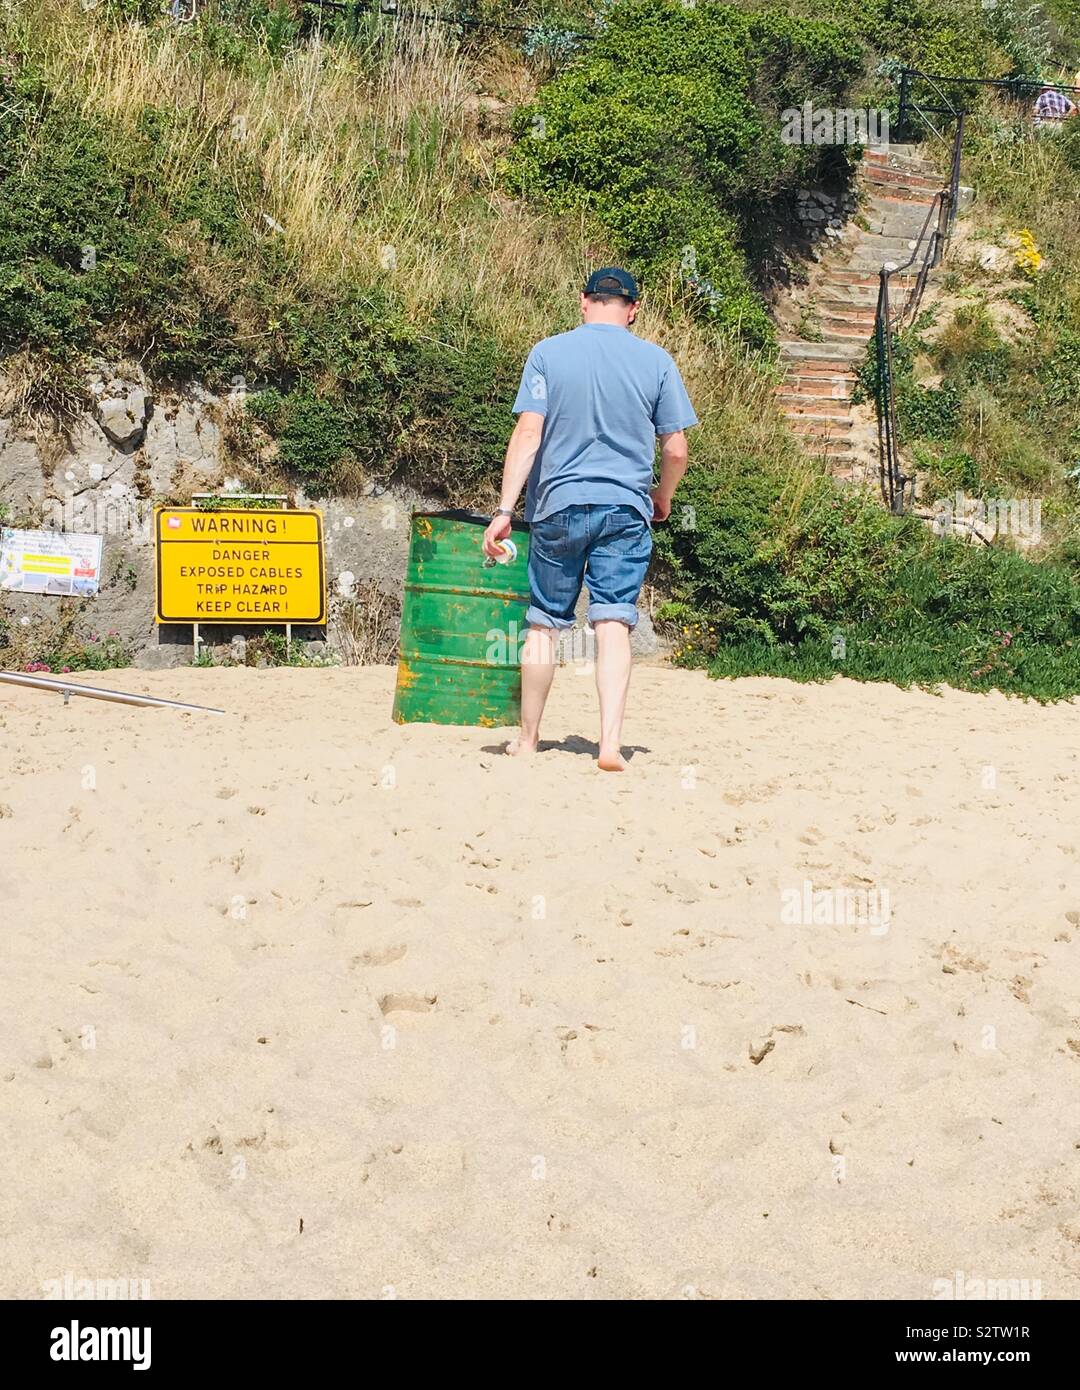 Man wearing rolled up jeans, walking towards a bin and safety sign on a sandy beach with steps access Stock Photo